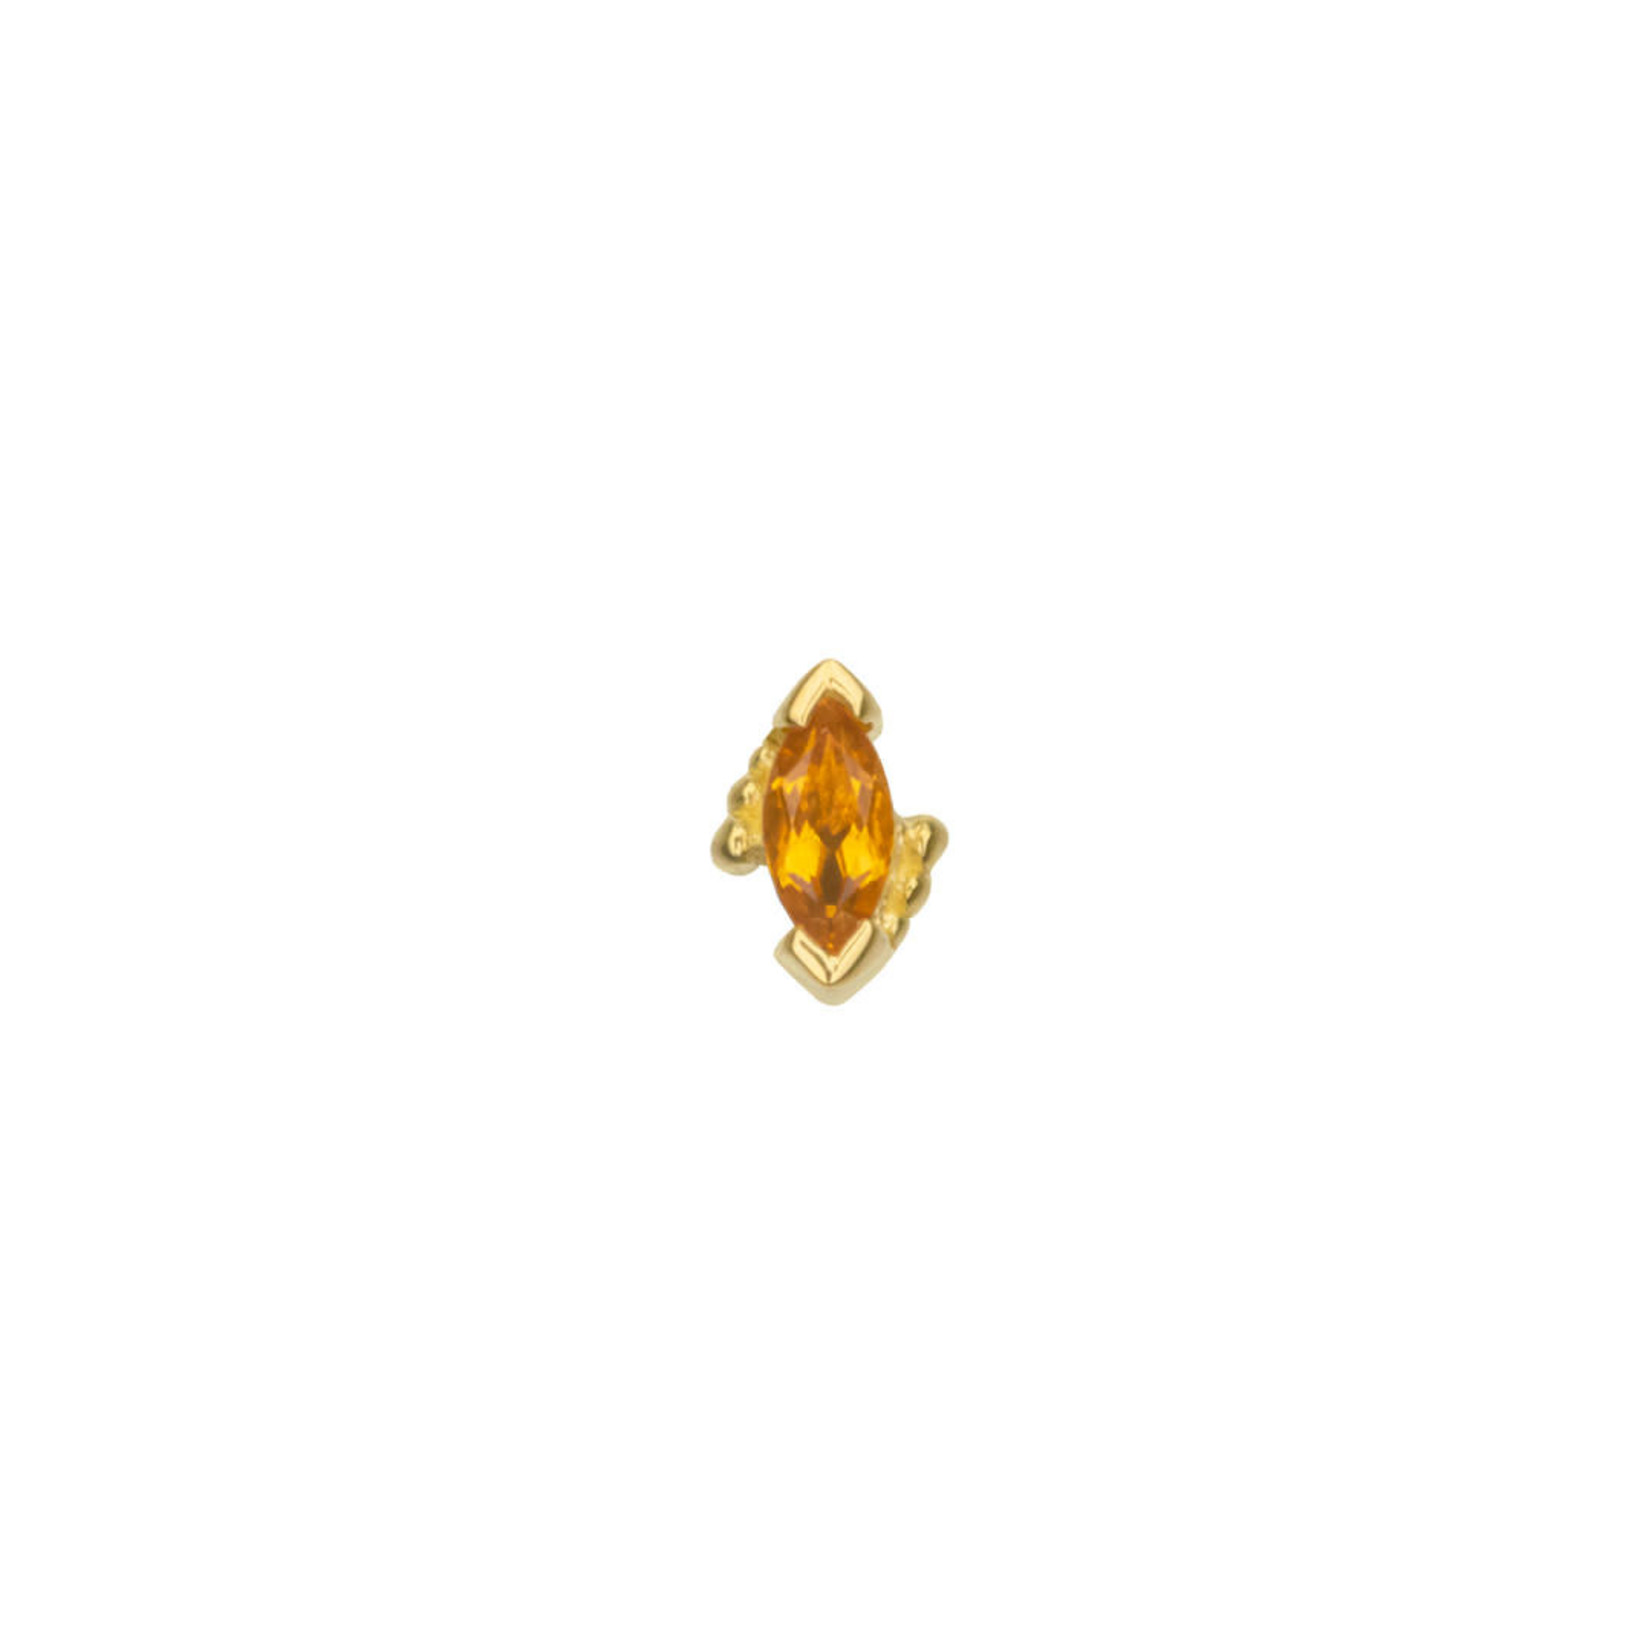 BVLA BVLA "Beaded Marquise" press-fit end with 4x2 AA Citrine